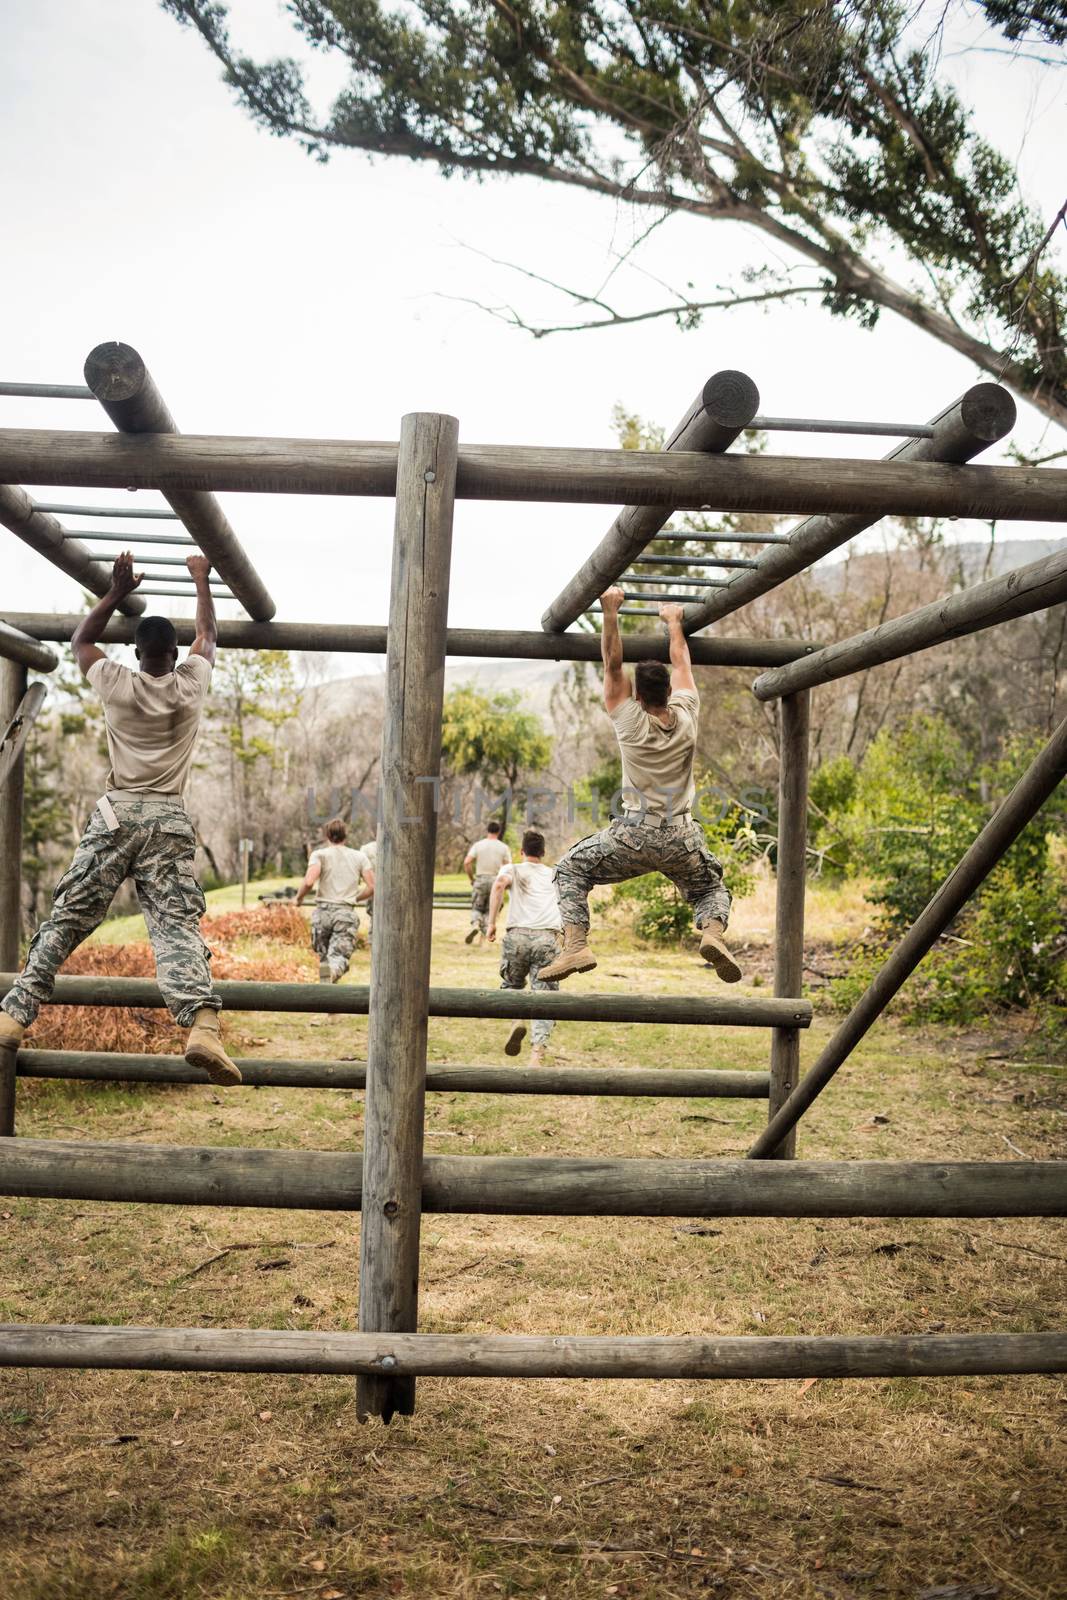 Rear view of Soldiers climbing monkey bars